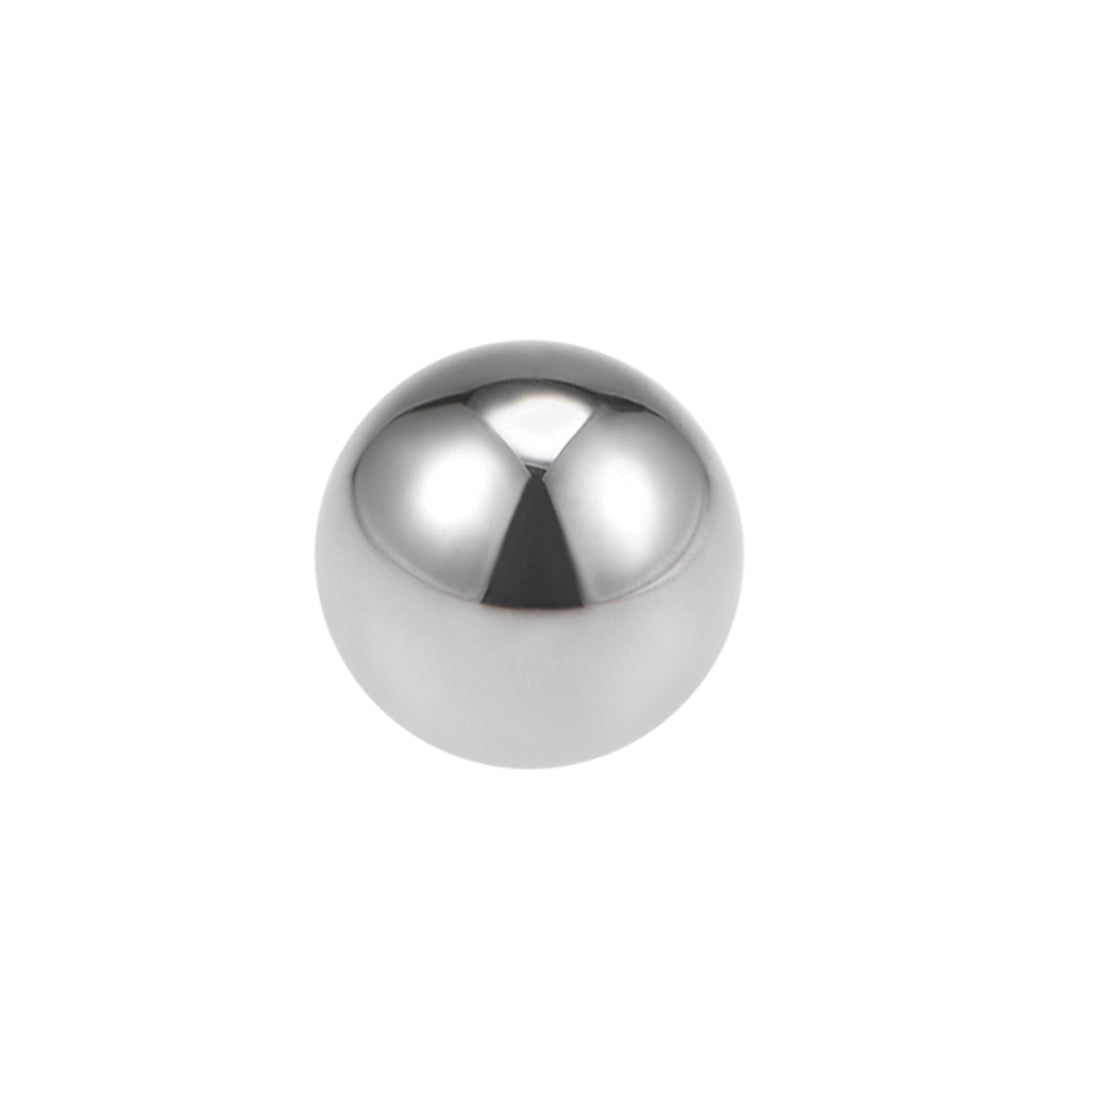 uxcell Uxcell Precision Balls 1-1/8" Solid Chrome Steel G25 for Ball Bearing Wheel